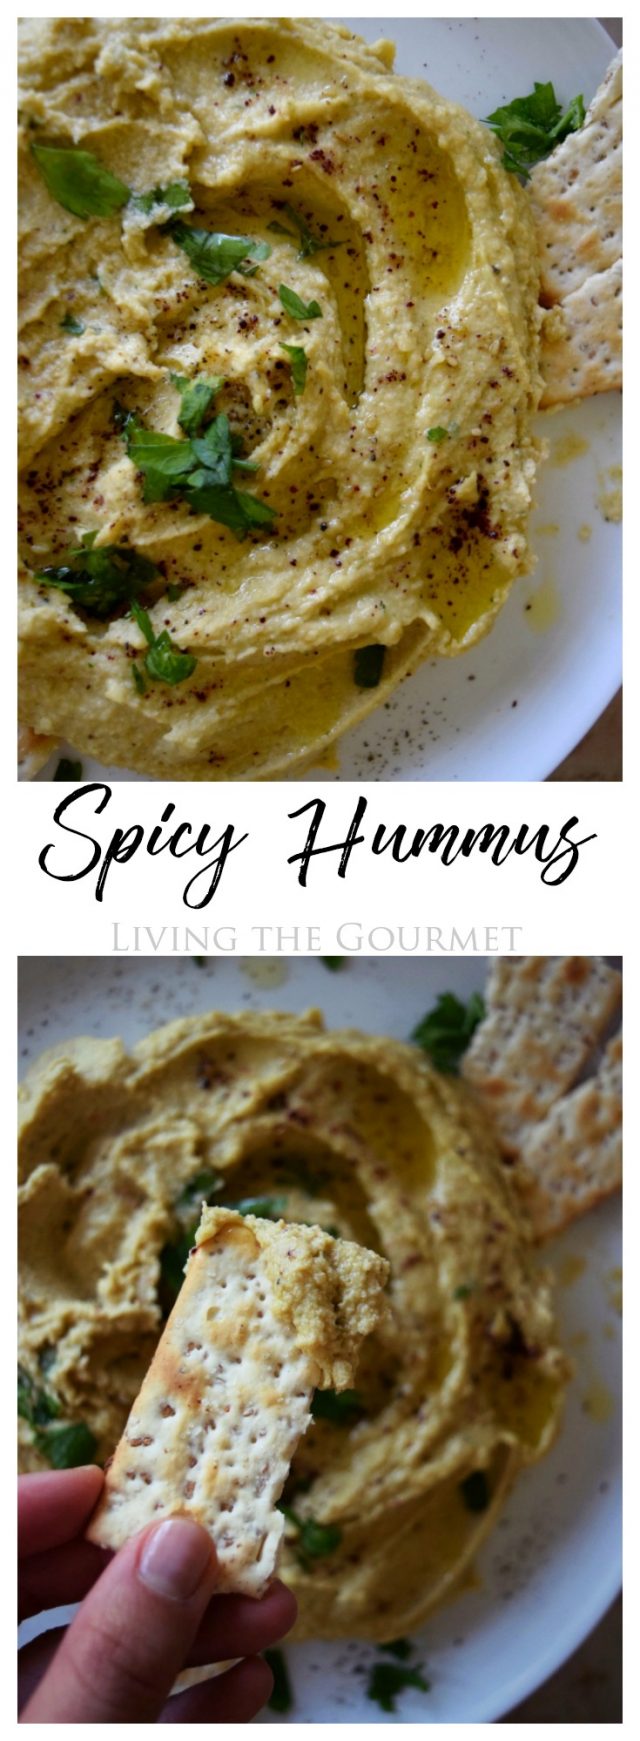 Spicy Hummus - Living The Gourmet